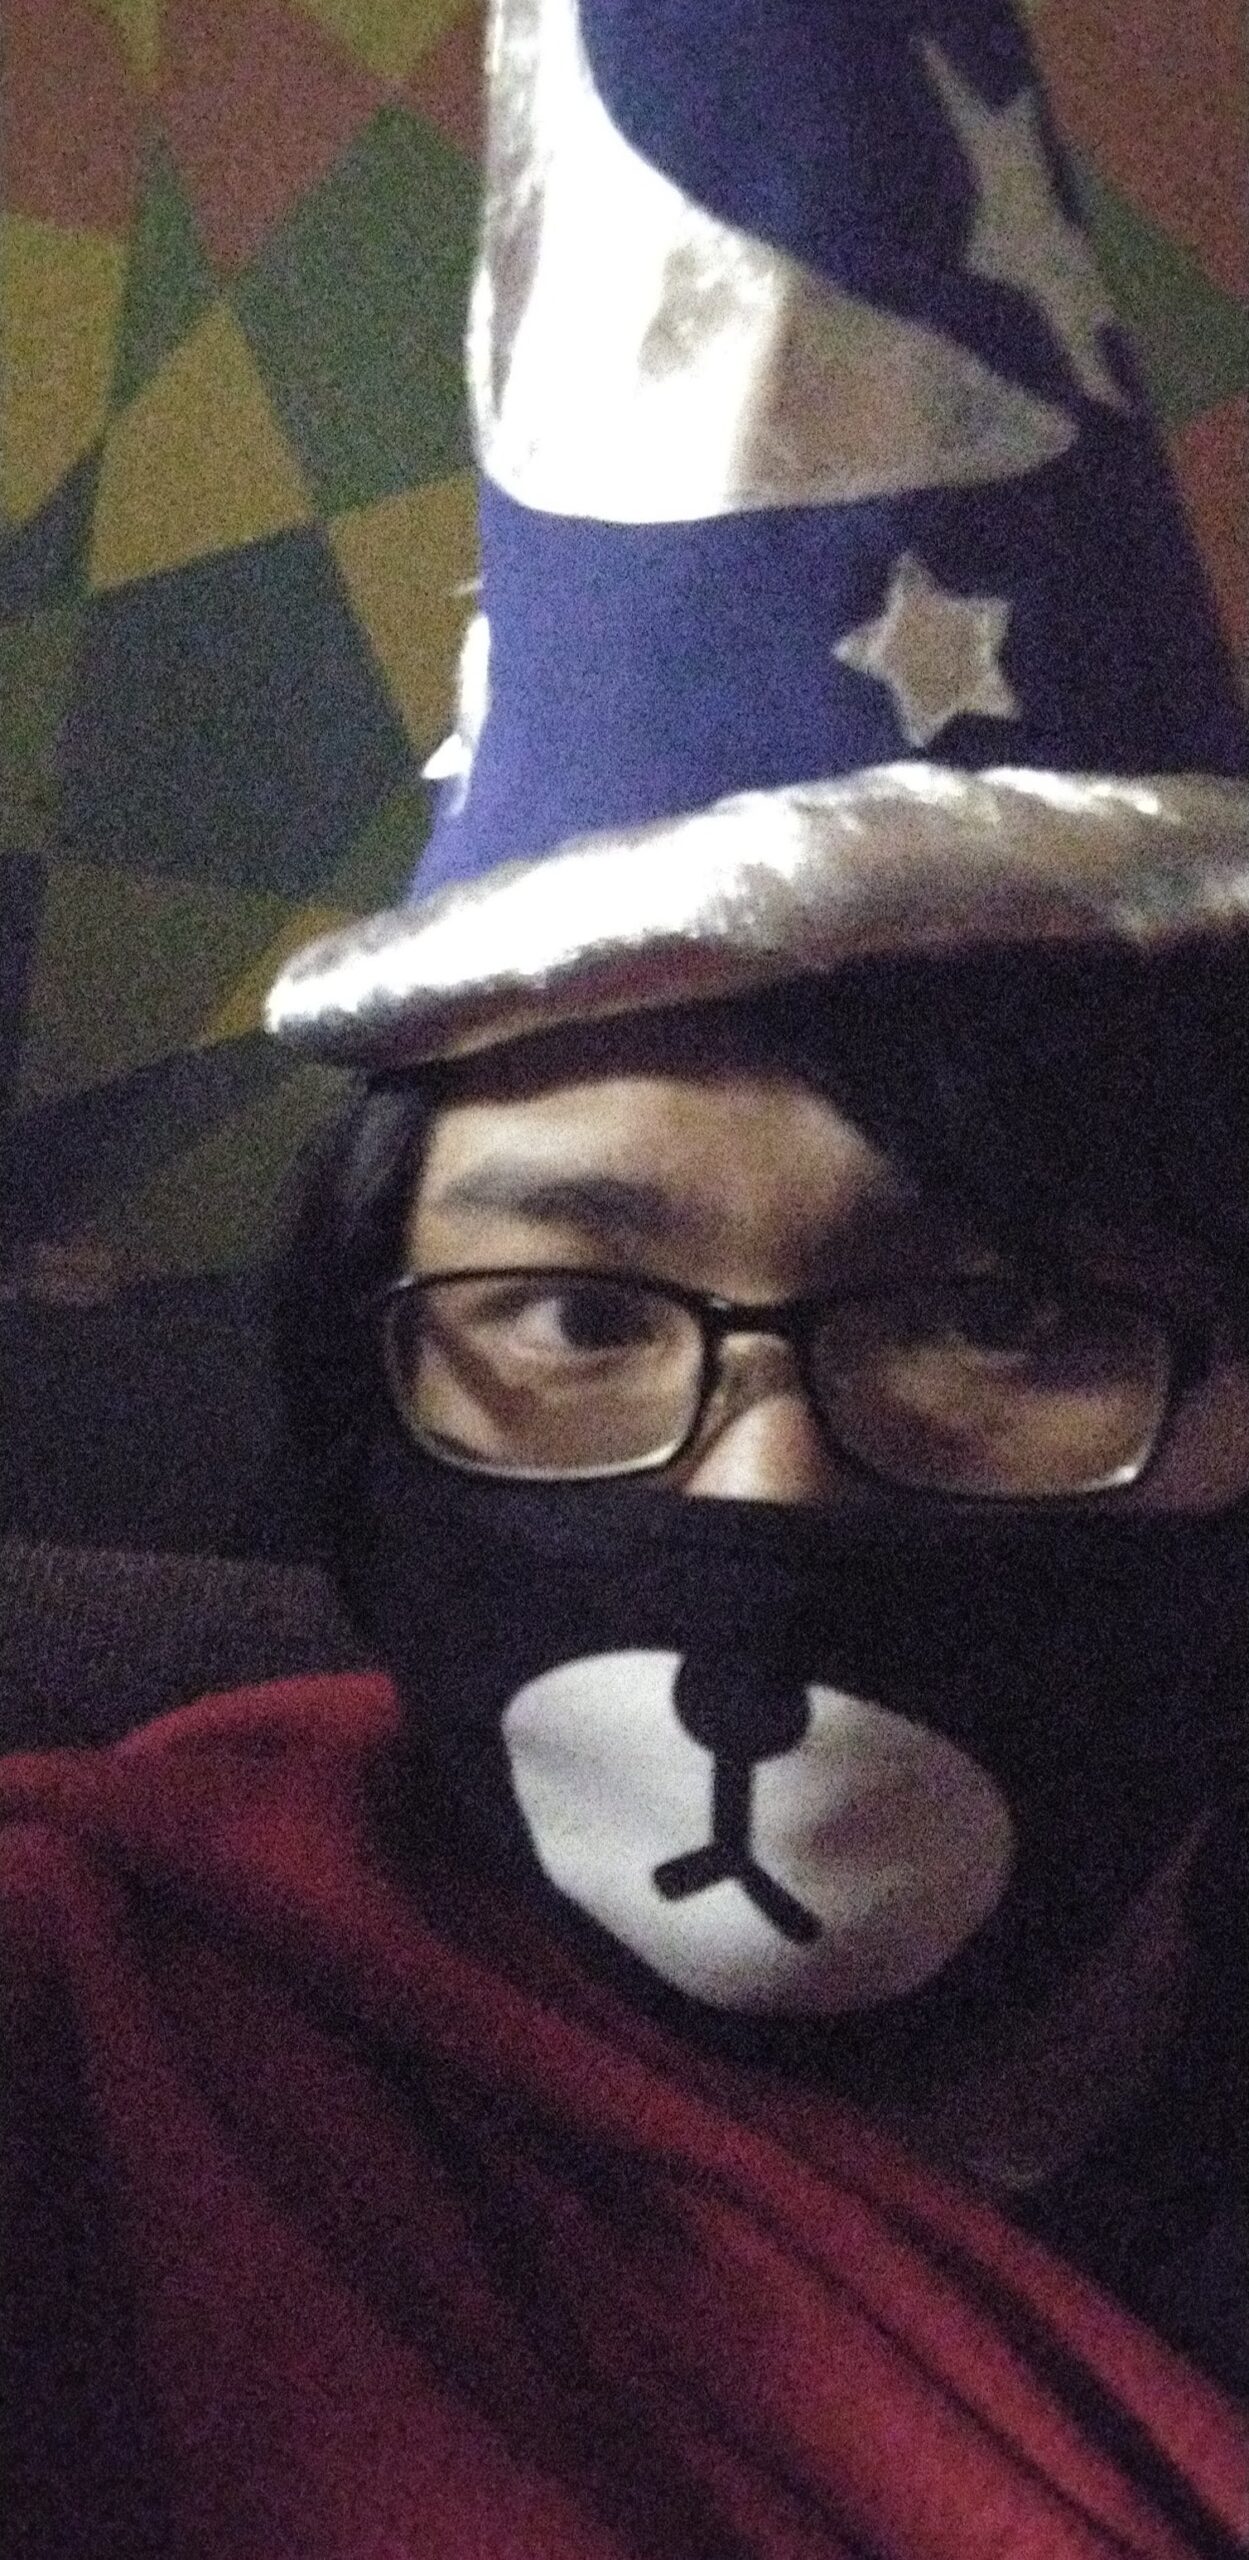 selfie of me wearing a wizard hat and a bear mask and a red blanket draped over me